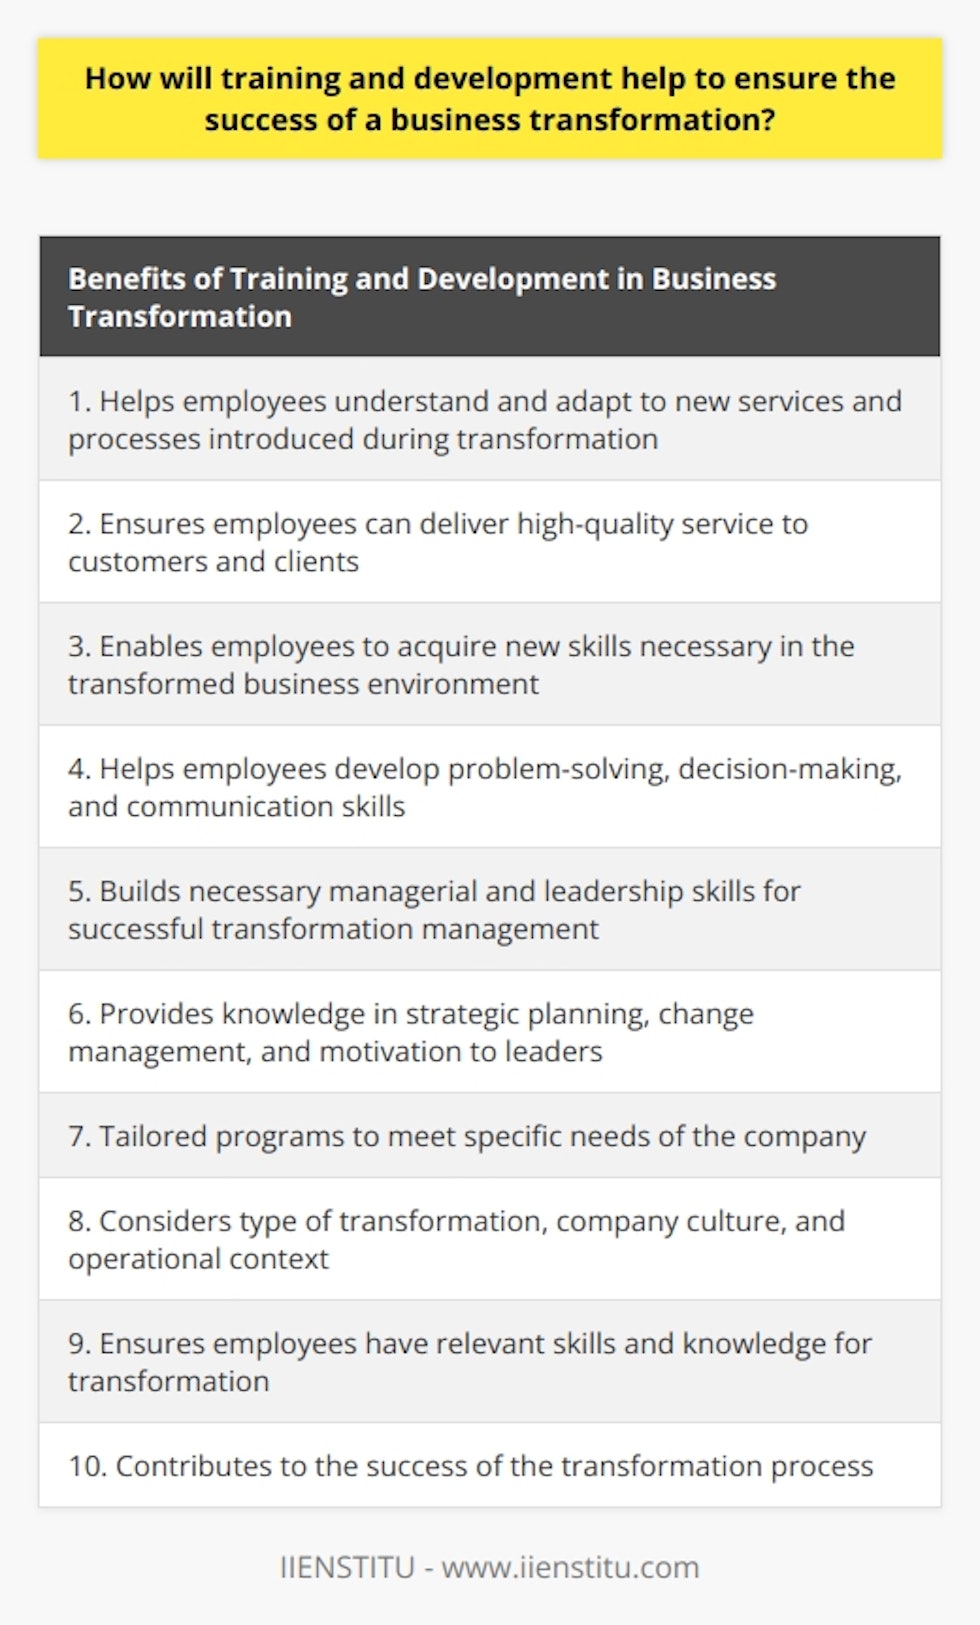 Training and development play a crucial role in ensuring the success of a business transformation. When a company undergoes a transformation, it typically involves significant changes in its organizational structure, processes, and technology. Employees need to be equipped with the knowledge and skills to navigate these changes effectively.One of the key benefits of training and development in a business transformation is that it helps employees understand and adapt to the new services and processes introduced during the transformation. By providing comprehensive training programs, employees can learn how to use the new systems and services proficiently. This ensures that they can deliver high-quality service to customers and clients, ultimately contributing to the success of the transformation.Additionally, training and development programs allow employees to acquire new skills that are necessary in the transformed business environment. As the company evolves, employees need to develop problem-solving, decision-making, and communication skills to meet the new challenges. Training programs can focus on developing these skills, enabling employees to contribute effectively to the transformation process.Furthermore, training and development activities are important for building the necessary managerial and leadership skills required for successful business transformation management. Managers and leaders play a critical role in driving and implementing the transformation initiatives. By providing training in strategic planning, change management, and motivation, companies can ensure that their leaders have the knowledge and capabilities to lead the transformation effectively.It is important for training and development programs to be tailored to the specific needs of the company. This includes considering the type of transformation, the company's culture, and the operational context. By aligning the training programs with these factors, companies can ensure that employees receive the necessary skills and knowledge relevant to the transformation.In conclusion, training and development are vital for the success of a business transformation. These programs help employees understand and adapt to the changes, acquire new skills, and enable leaders to effectively drive the transformation. By investing in training and development, companies can ensure that their employees are well-prepared and equipped to contribute to the success of the transformation process.